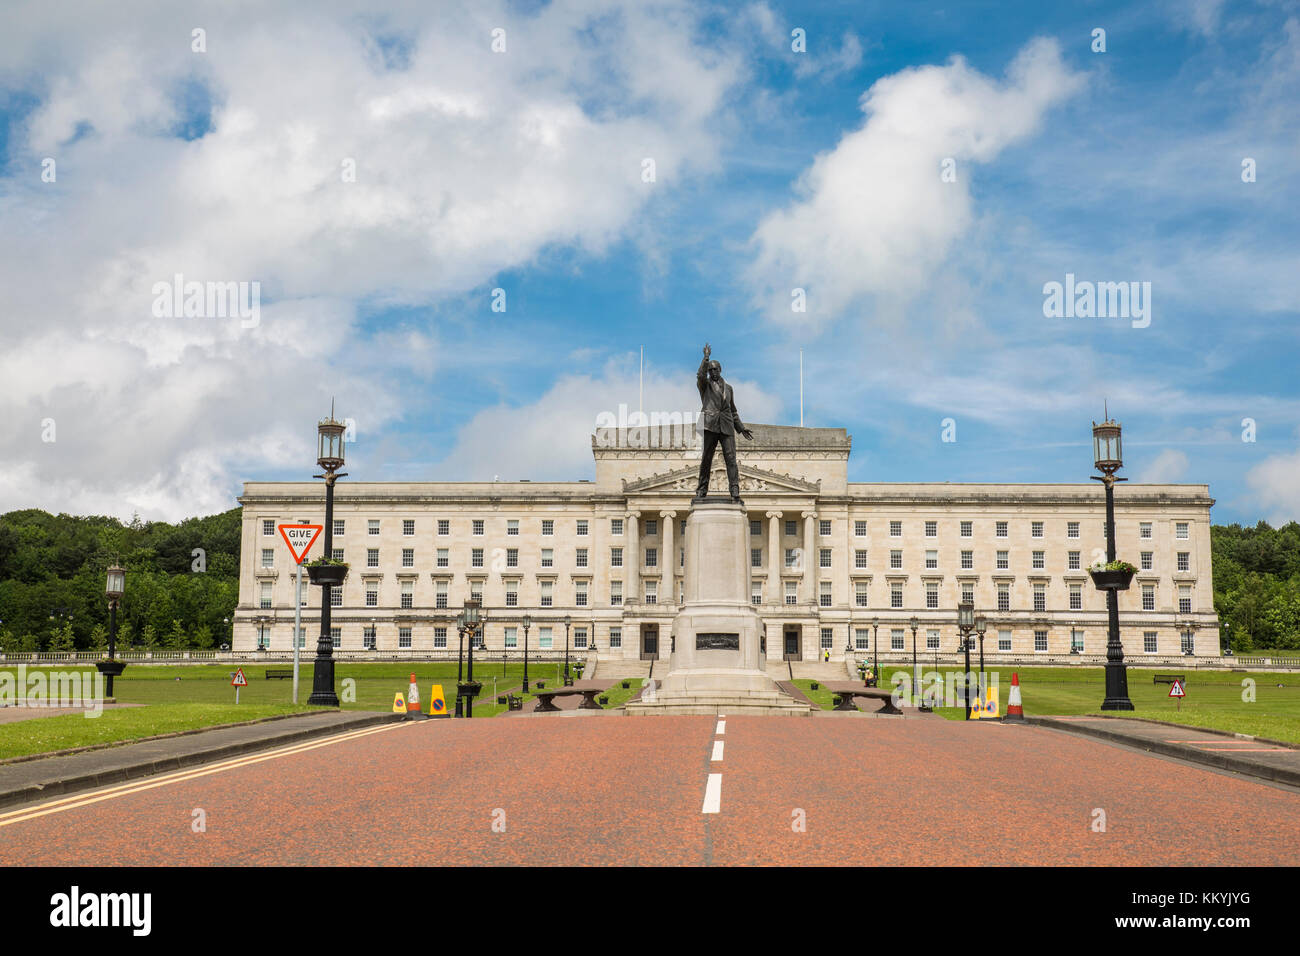 Stormont, Belfast, Northern Ireland - June 13, 2017: Stormont Estate, Seat of Government (Assembly) in Northern Ireland. Stock Photo